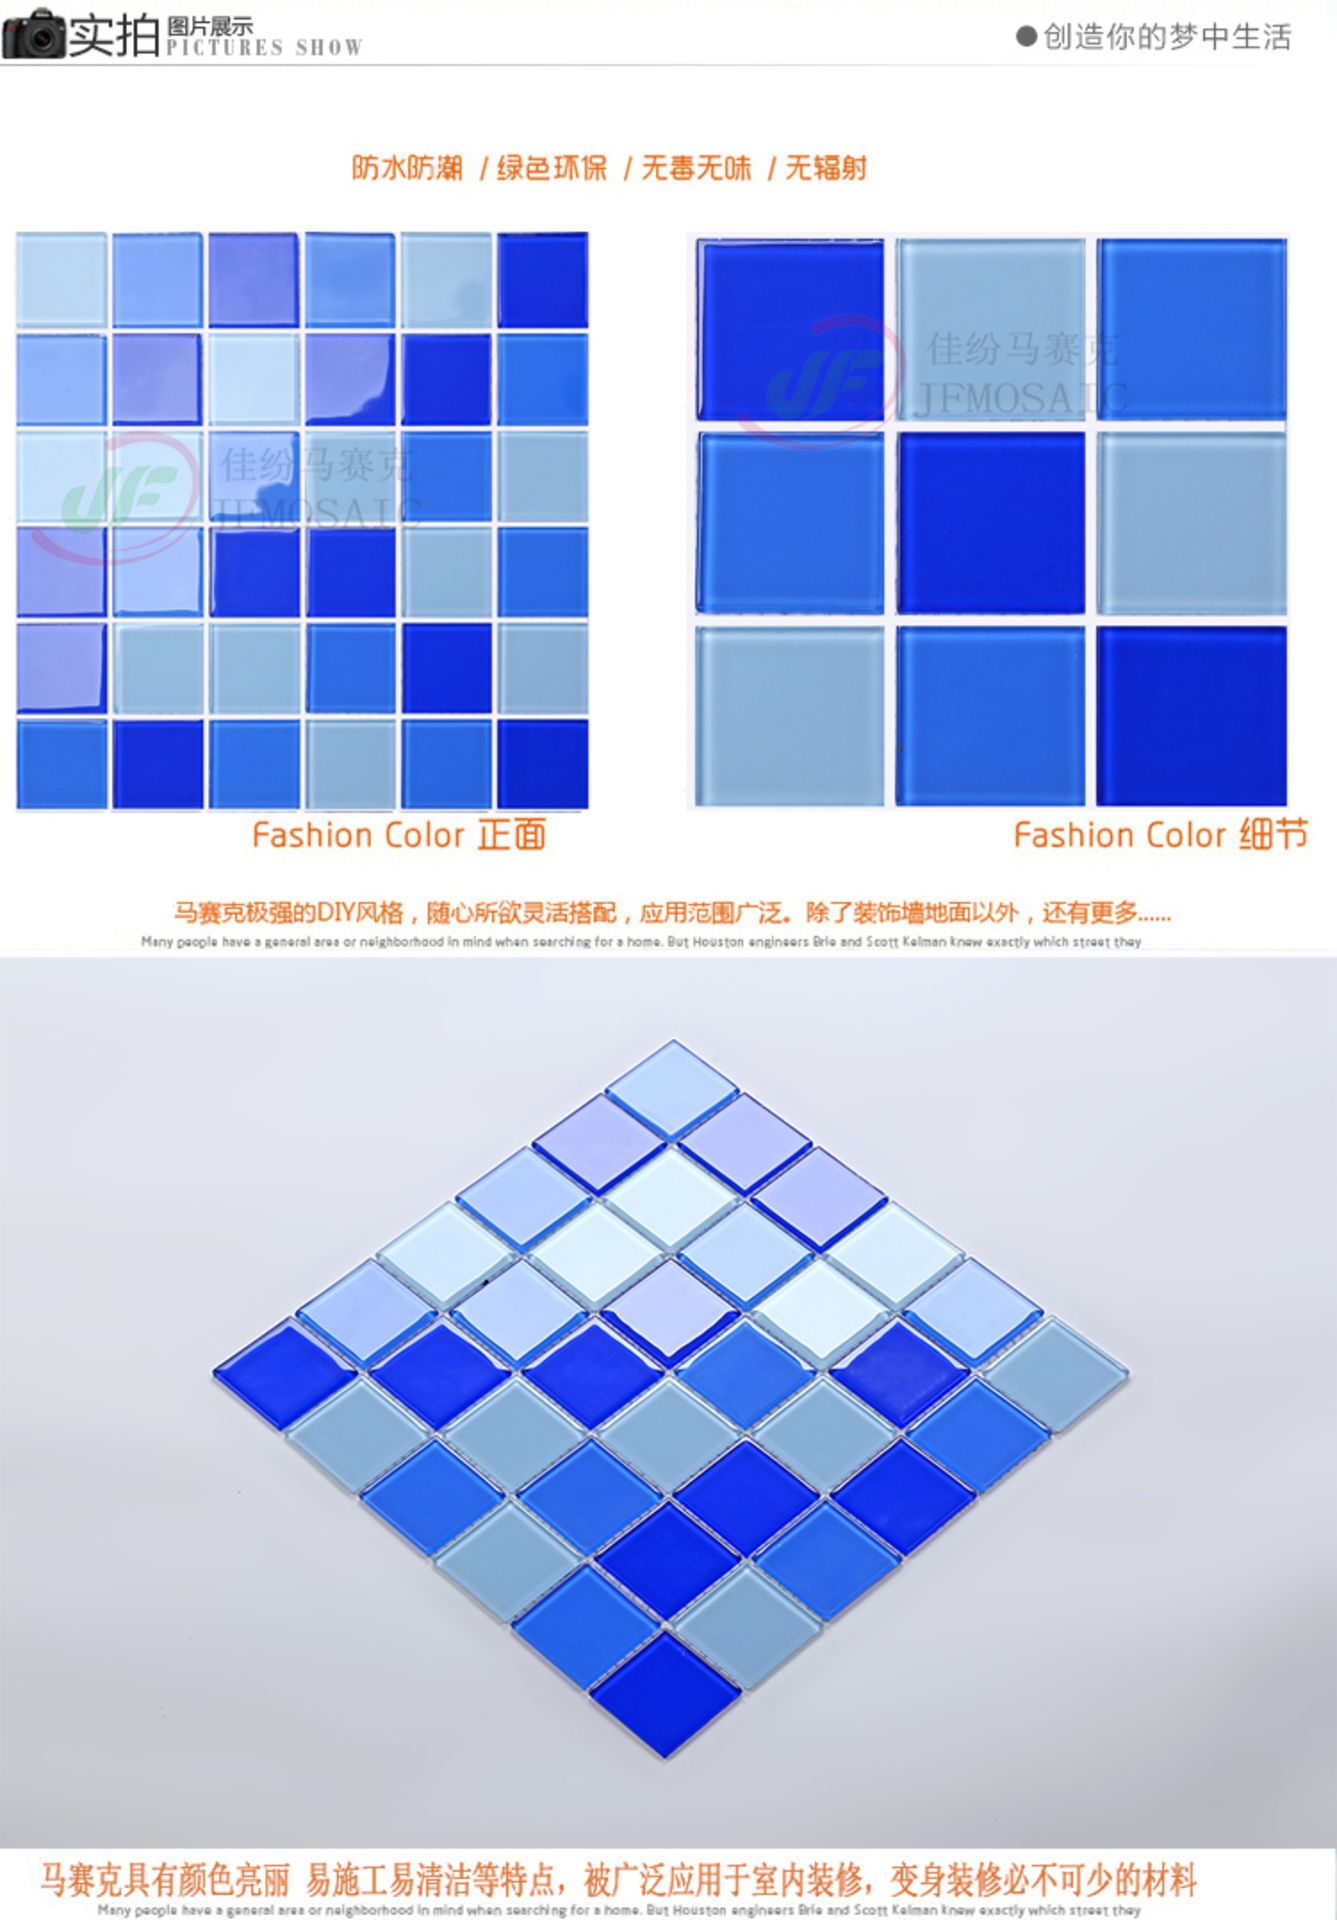 10 Square Metres - High Quality Glass/Stainless Steel Mosaic Tiles-110 sheets - Image 2 of 2